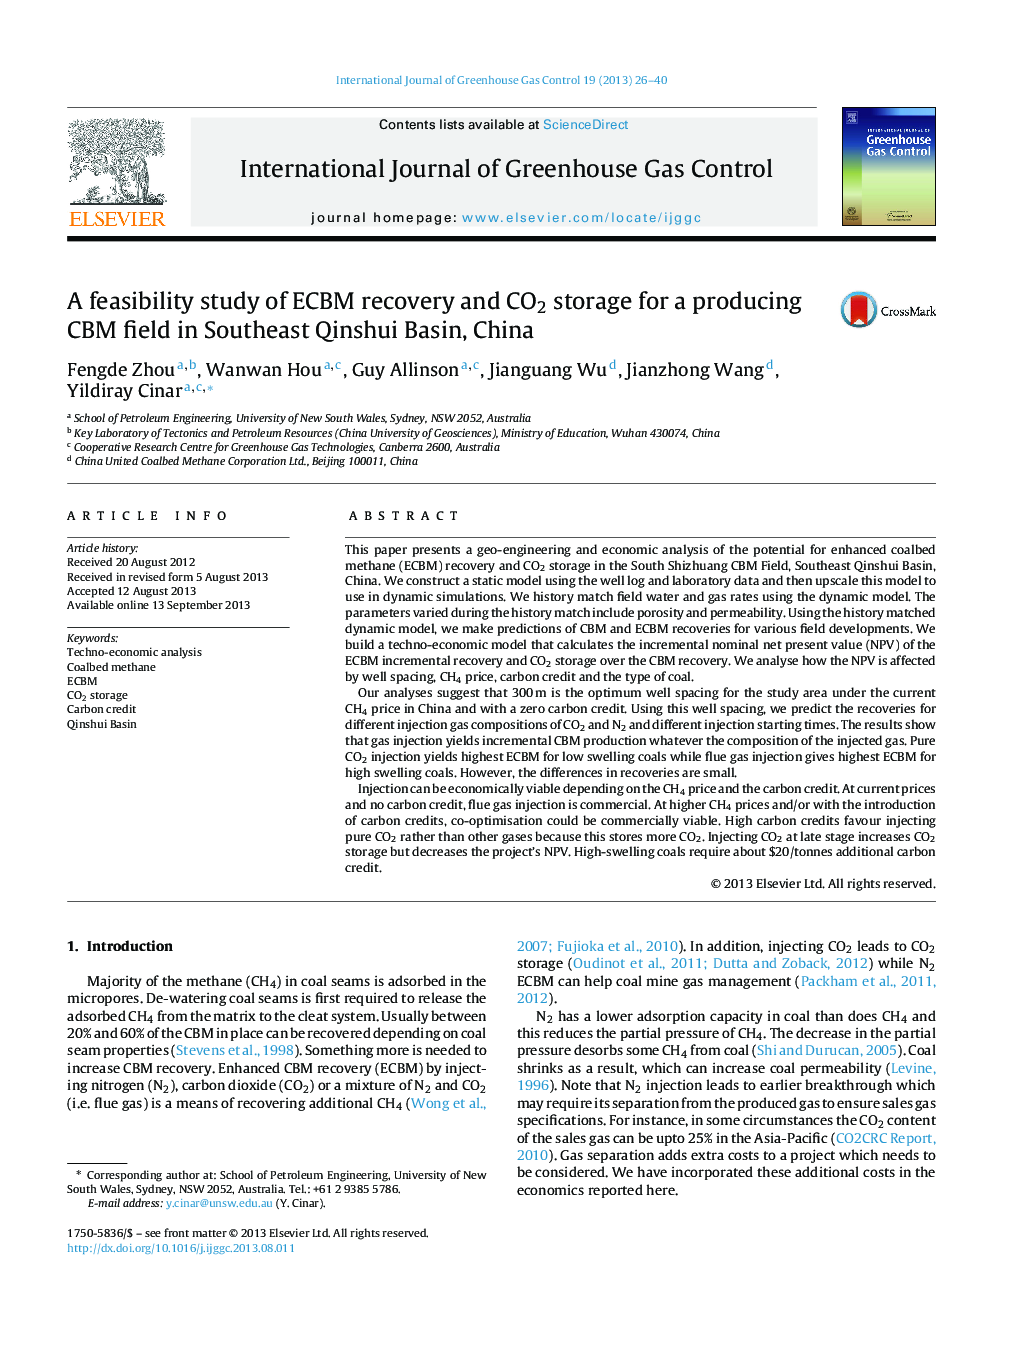 A feasibility study of ECBM recovery and CO2 storage for a producing CBM field in Southeast Qinshui Basin, China